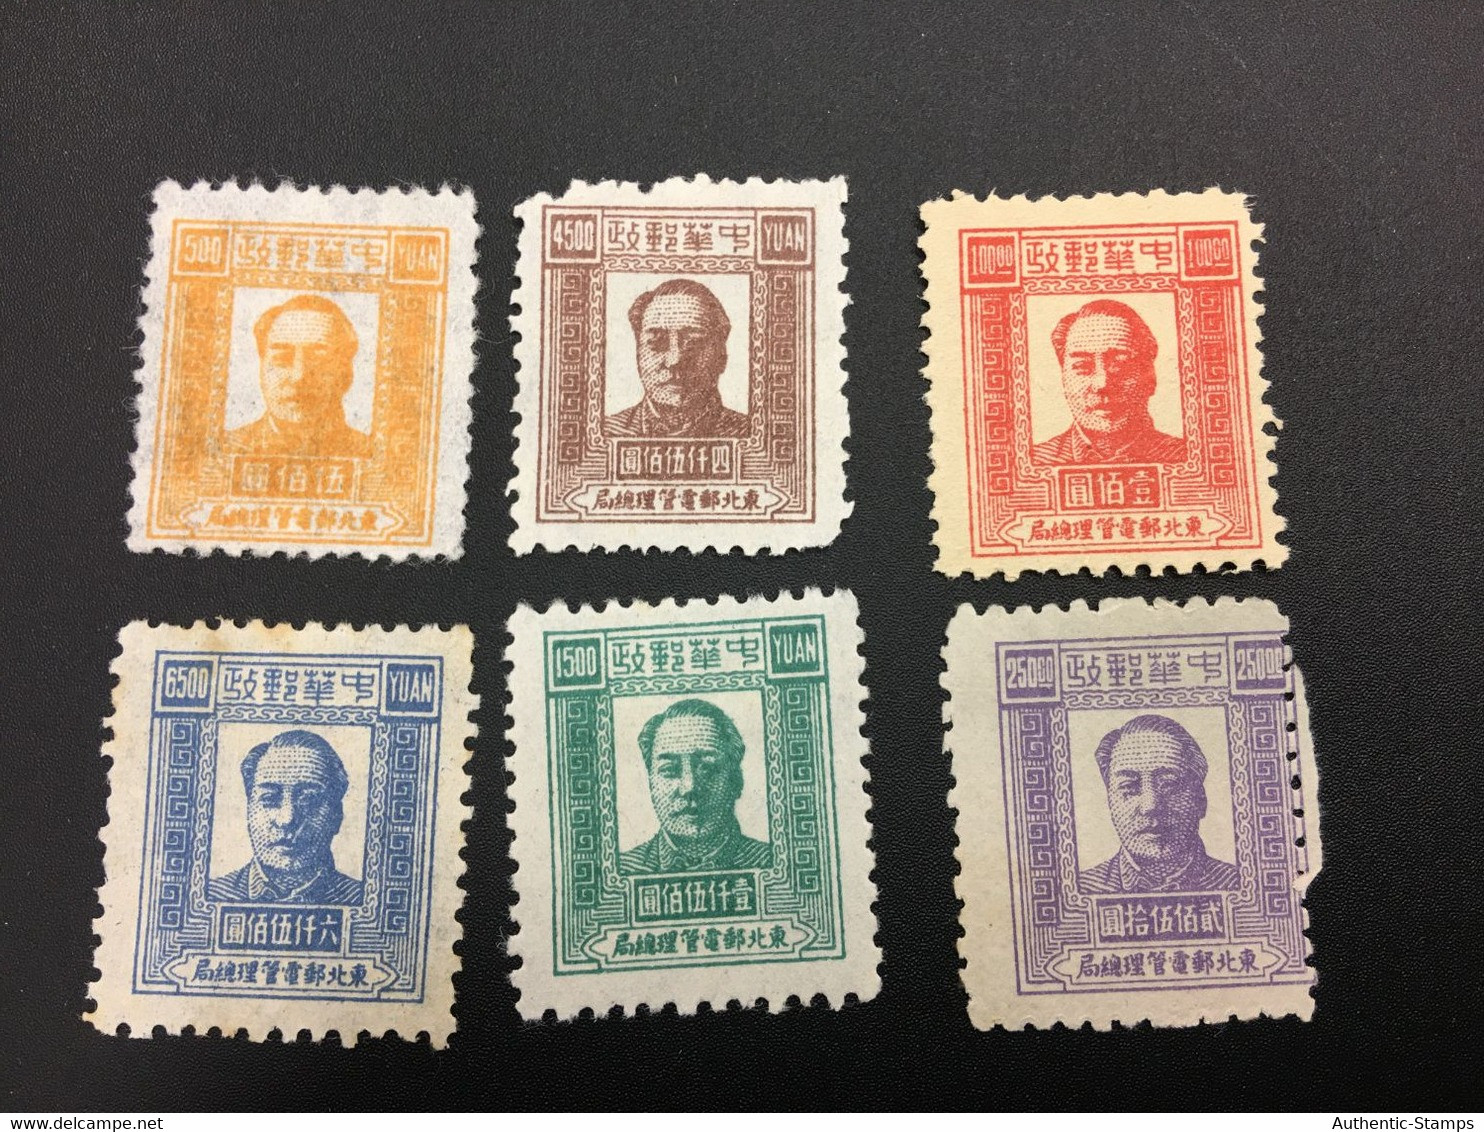 CHINA STAMP, SET, UNUSED, TIMBRO, STEMPEL, CINA, CHINE, LIST 6668 - Chine Du Nord-Est 1946-48